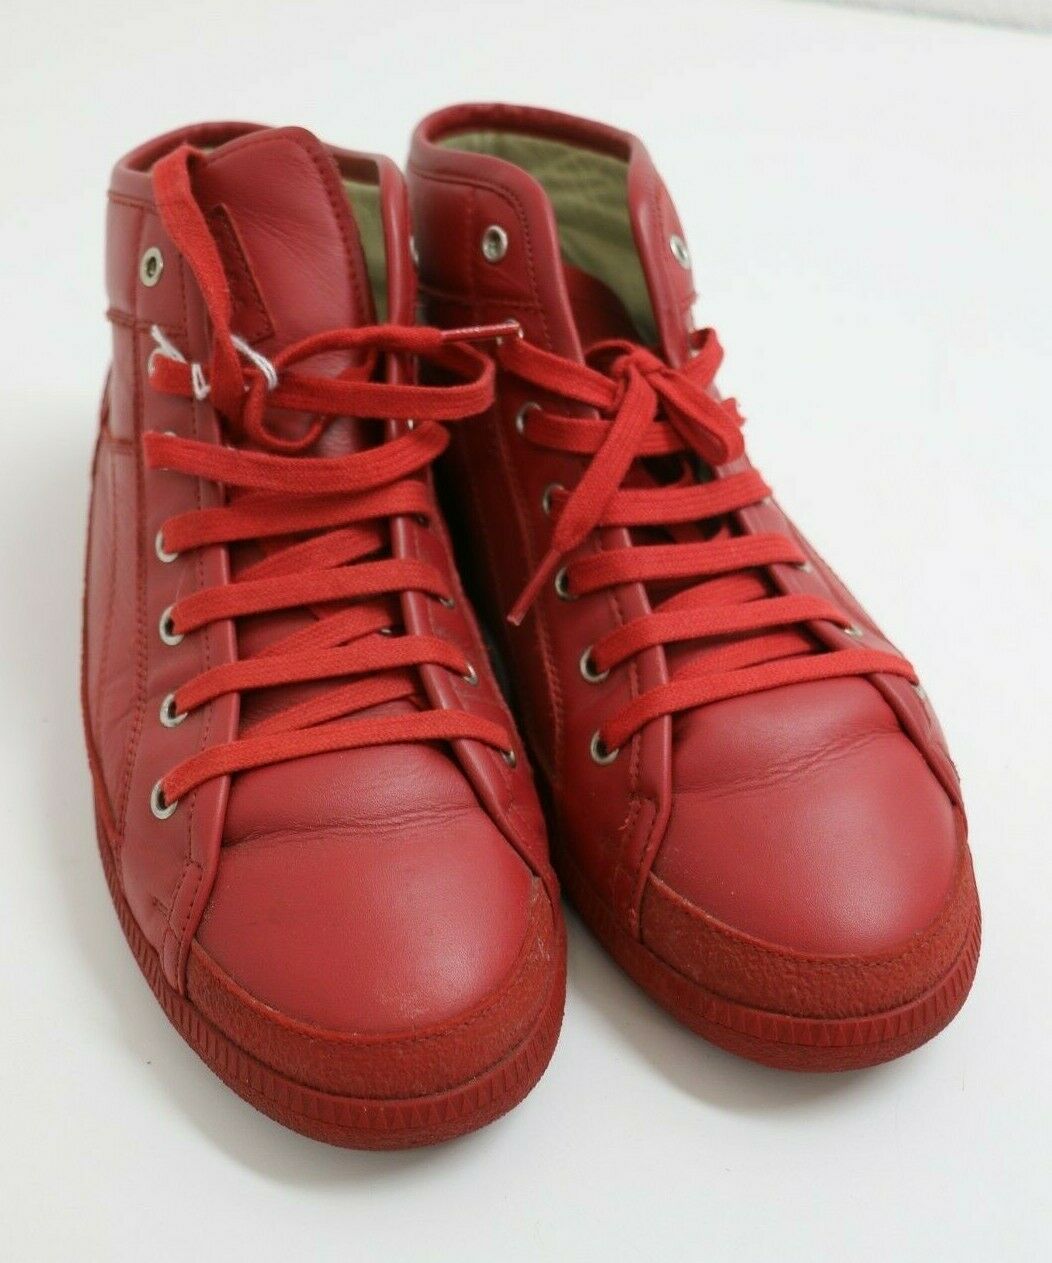 Maison Margiela Red High-Top Leather Sneakers | [S57WS0105] | Size US ...